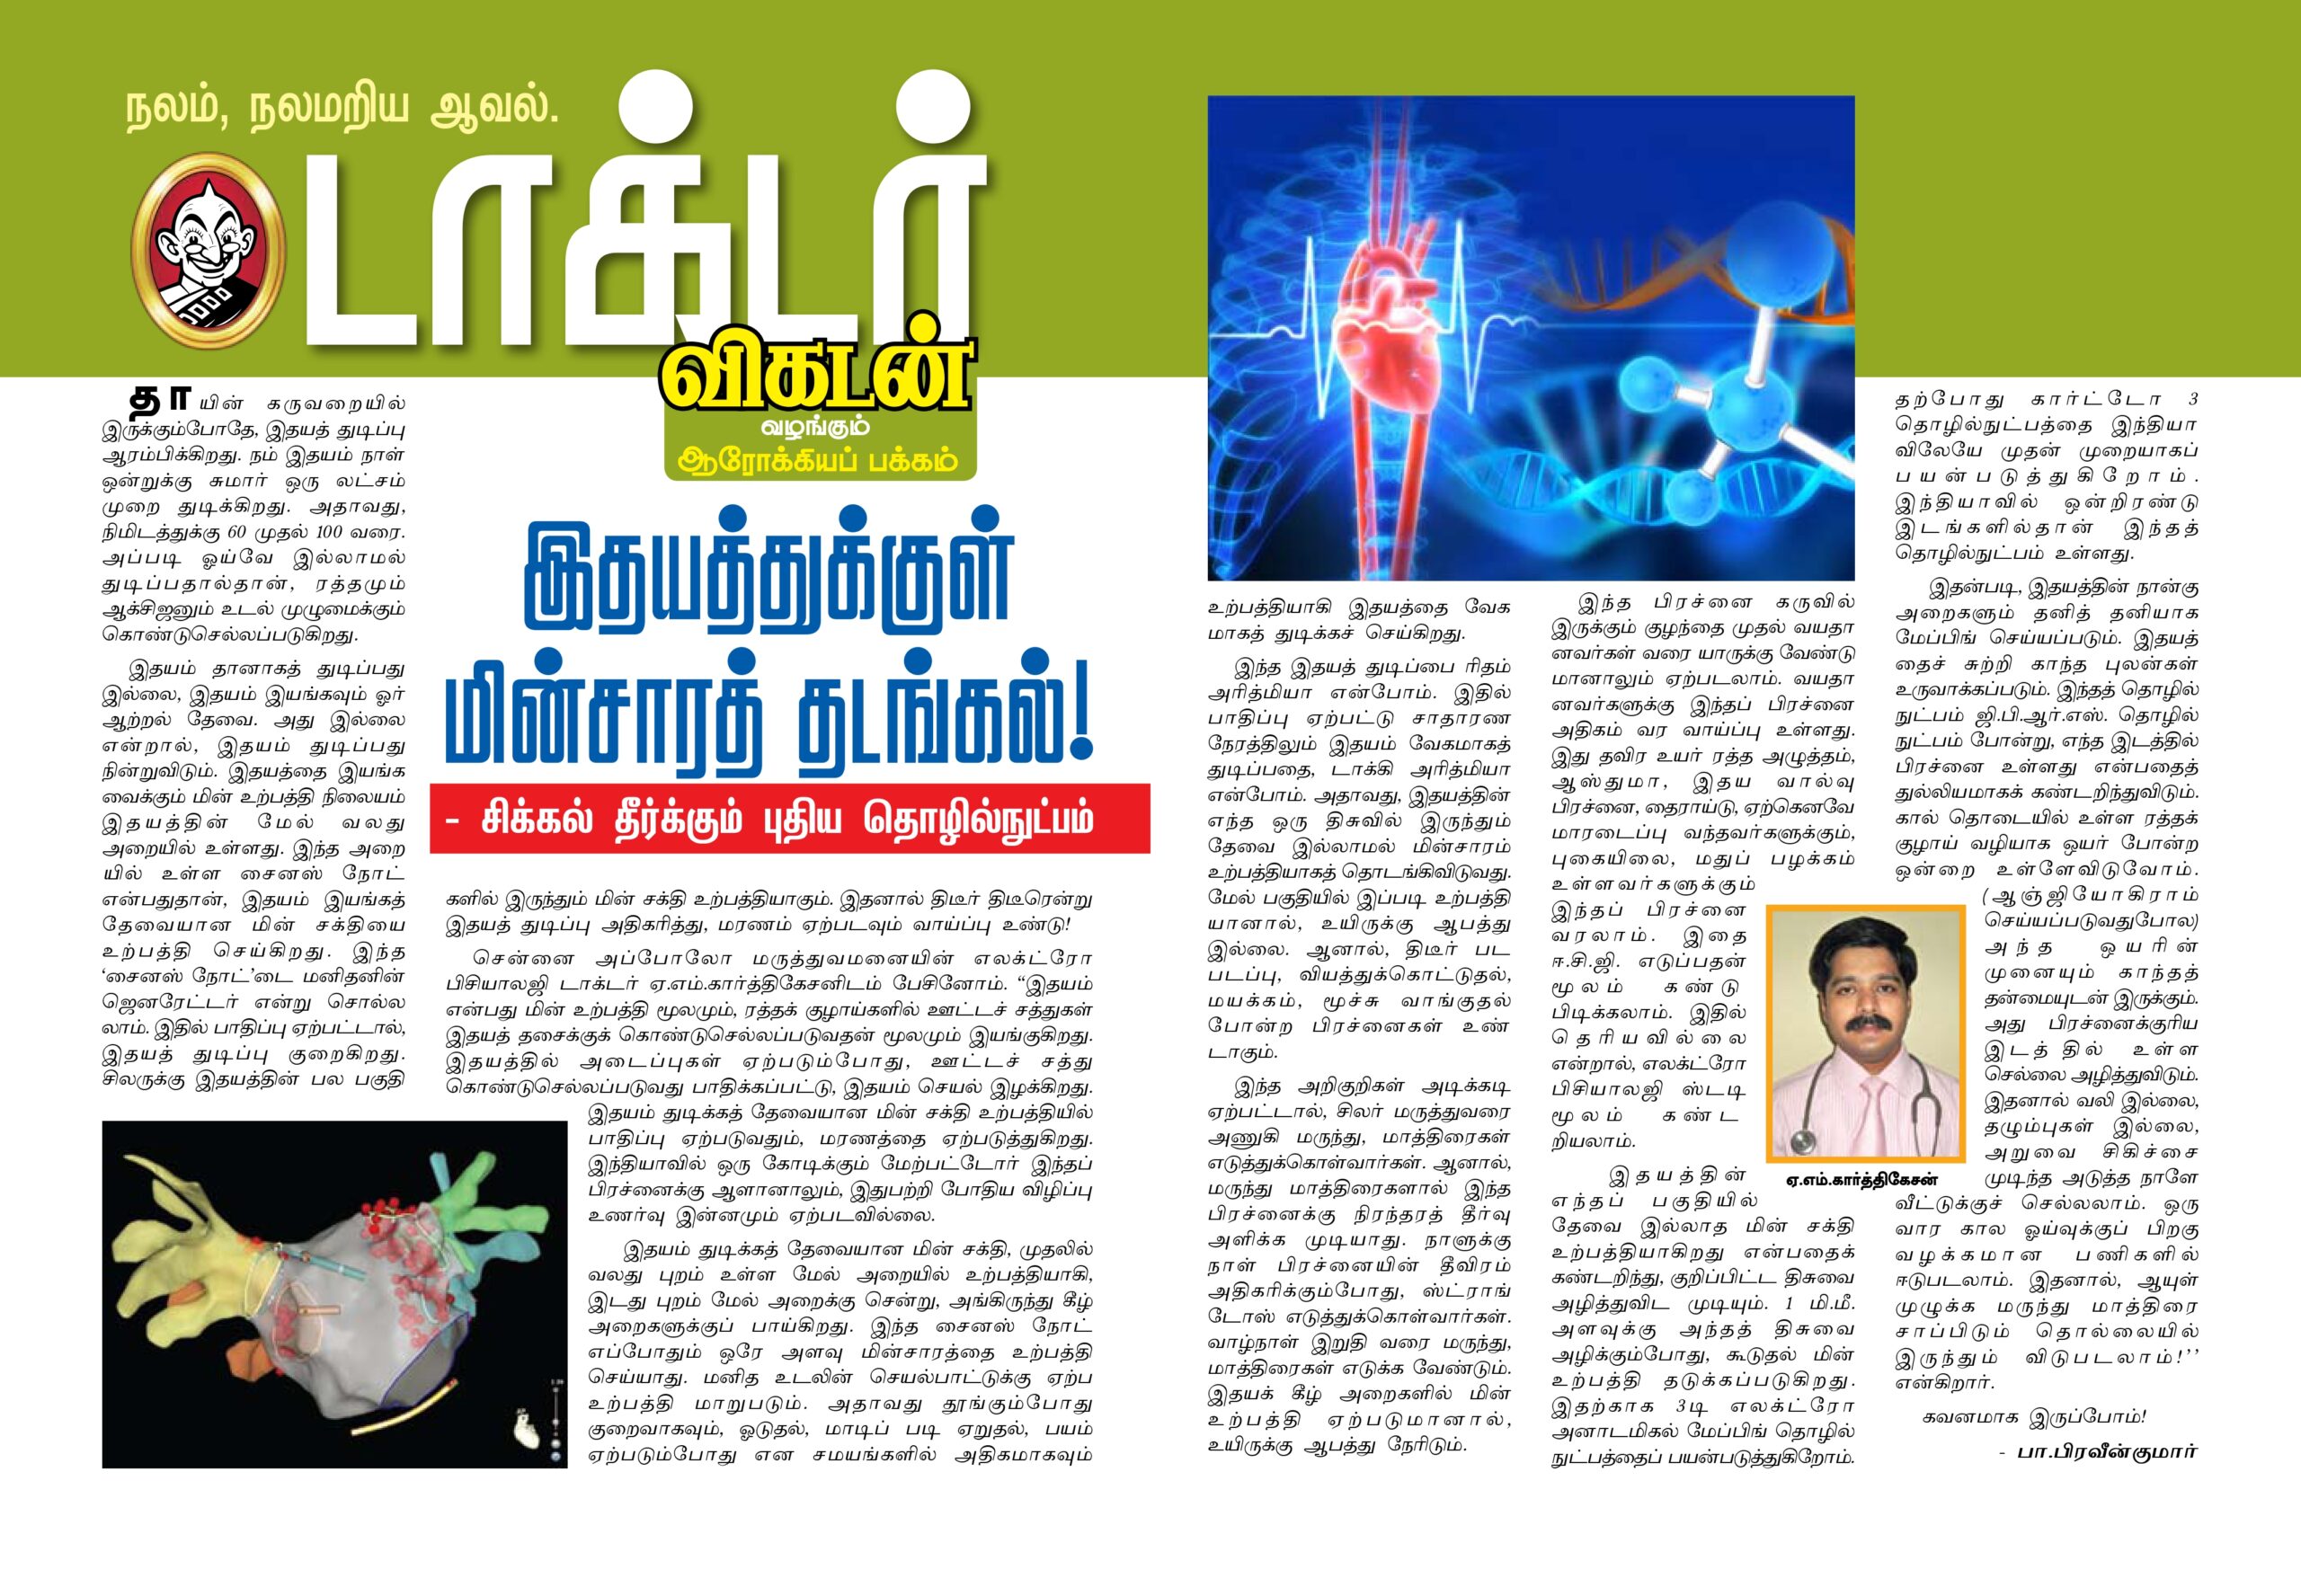 Image of a Tamil news article about the heartbeat by Dr. Karthigesan A.M.